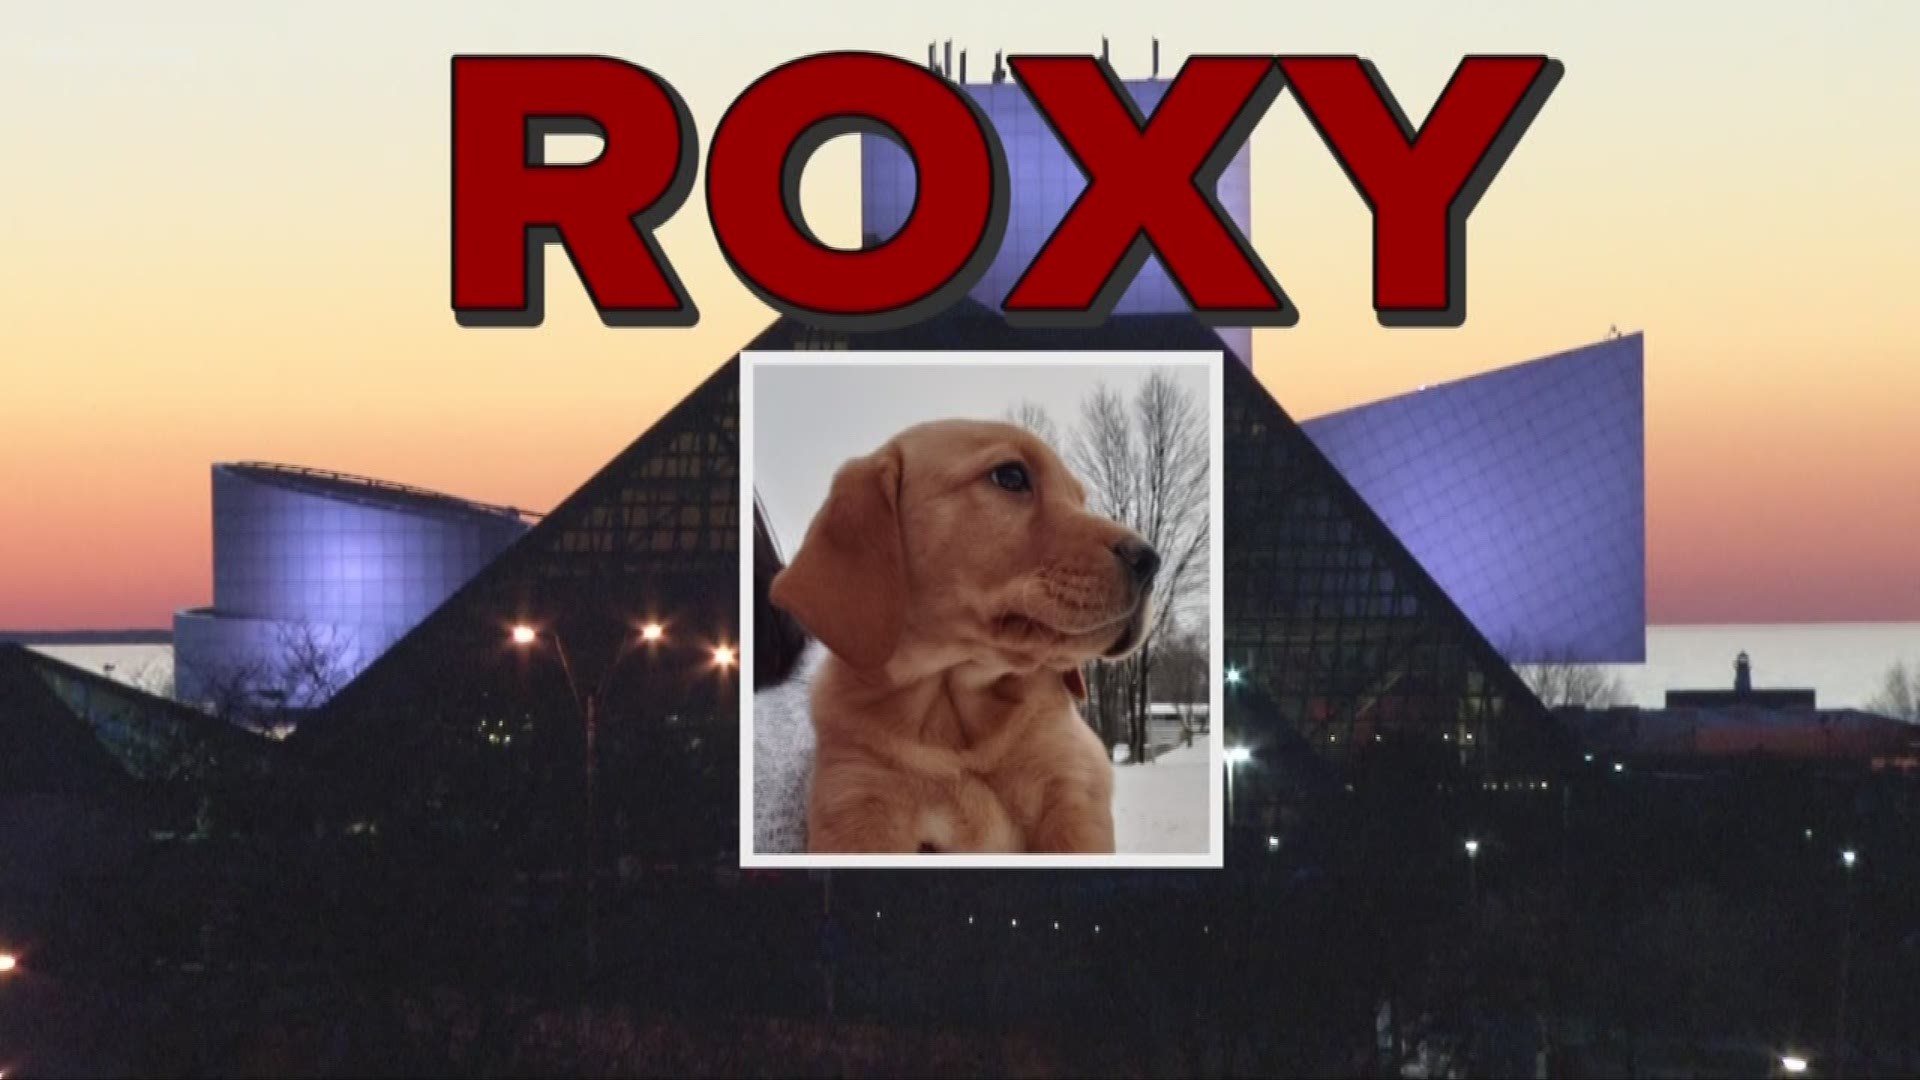 Feb. 12, 2019: For the last few days, you’ve been voting to pick the perfect name for our new puppy, which is joining the Channel 3 team through a partnership with Wags 4 Warriors. The results are in, and the winning name is… Roxy! Her name is a salute to the Rock and Roll Hall of Fame.